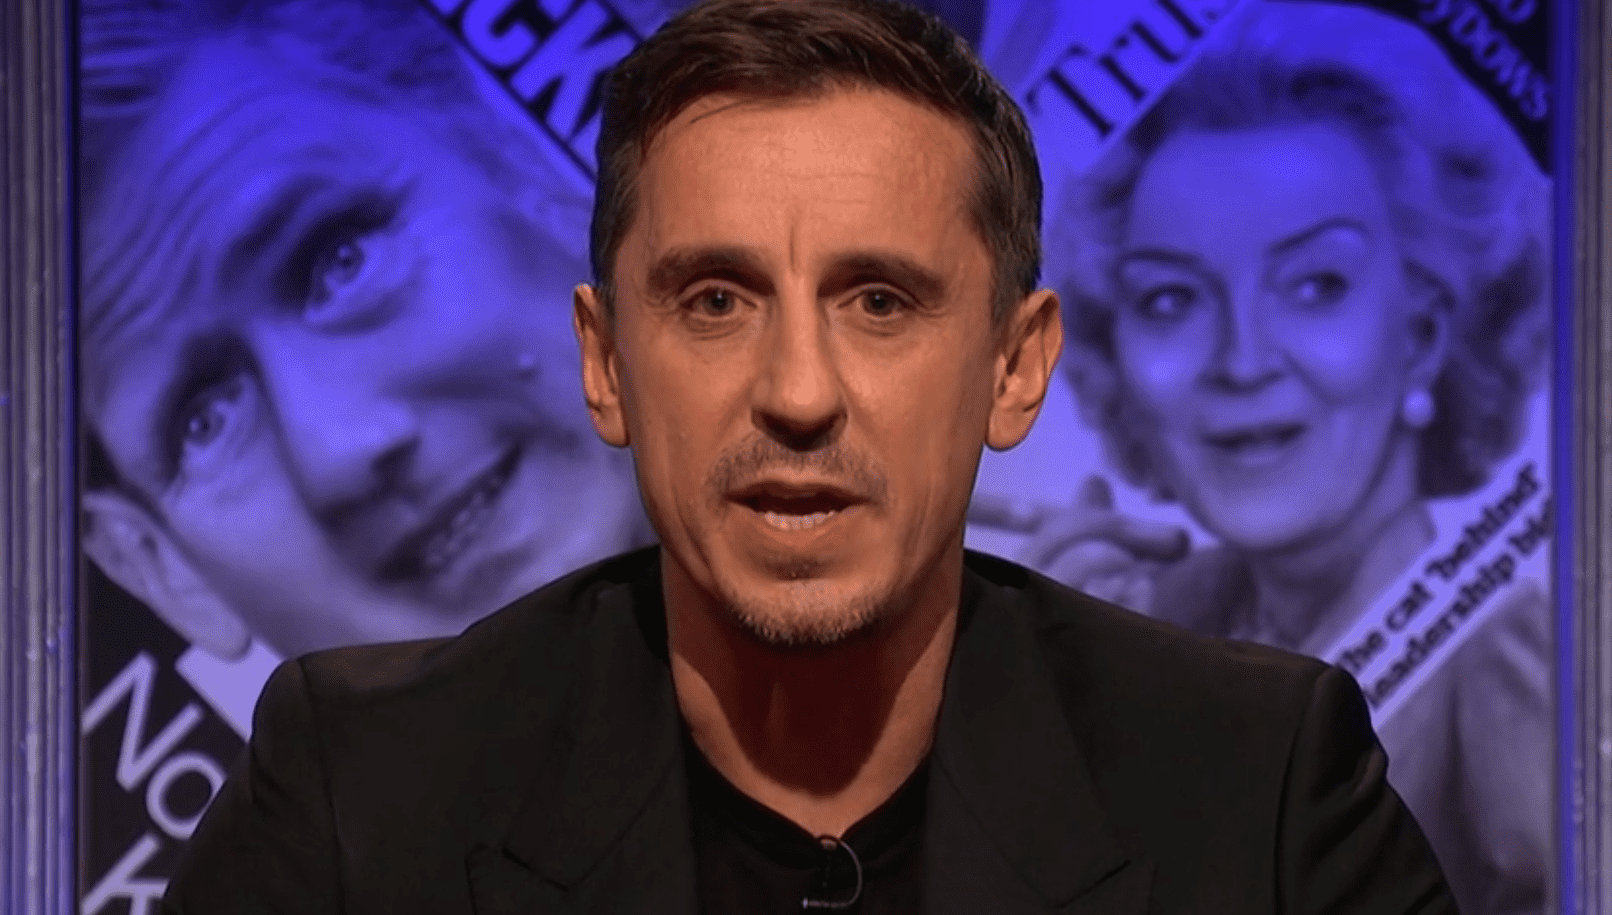 Gary Neville gets ROASTED by Hislop over Qatar World Cup role